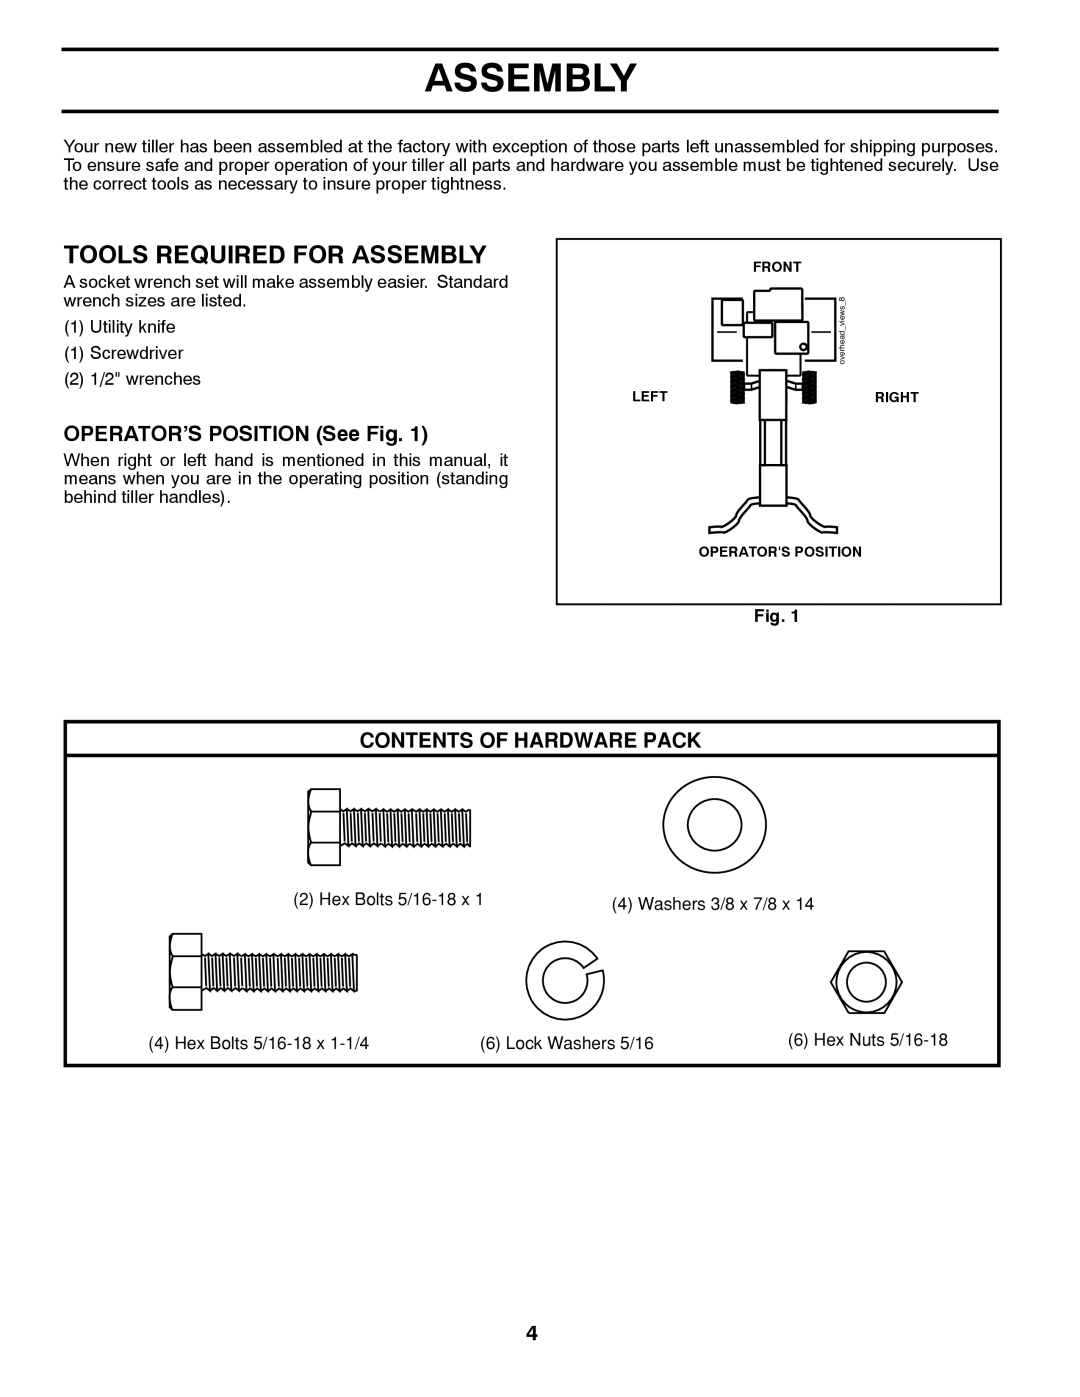 Poulan 427896, 96082001300 manual Tools Required For Assembly, OPERATOR’S POSITION See Fig, Contents Of Hardware Pack 